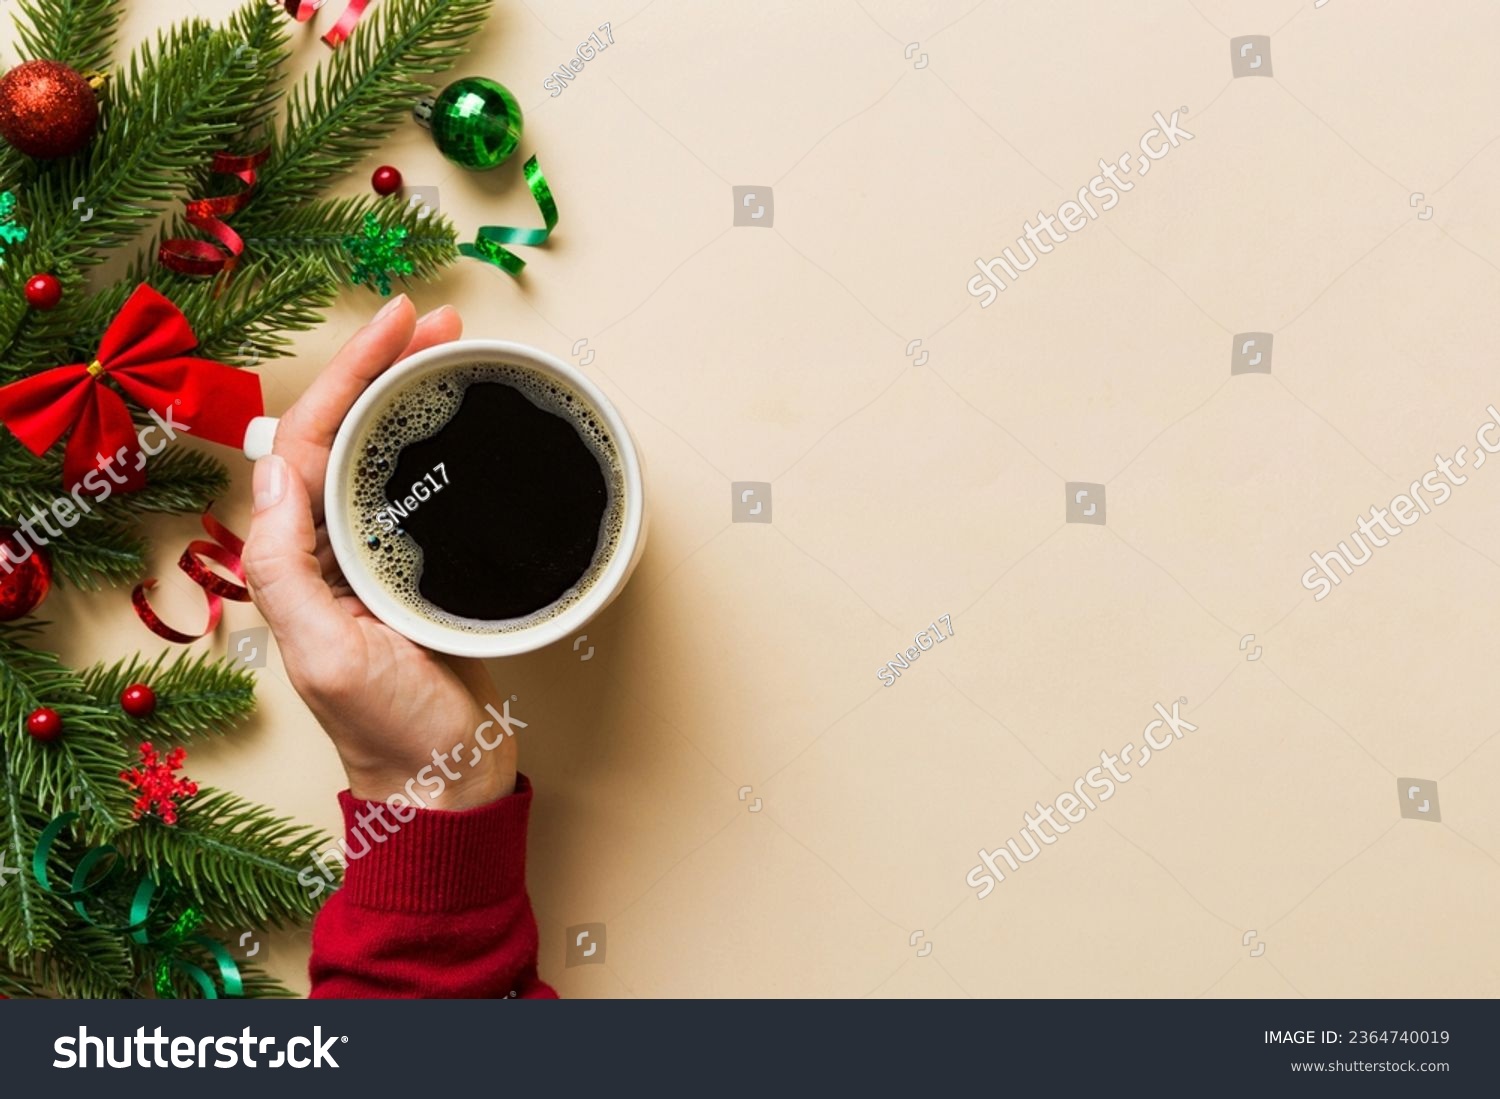 Woman holding cup of coffee. Woman hands holding a mug with hot coffee. Winter and Christmas time concept. #2364740019